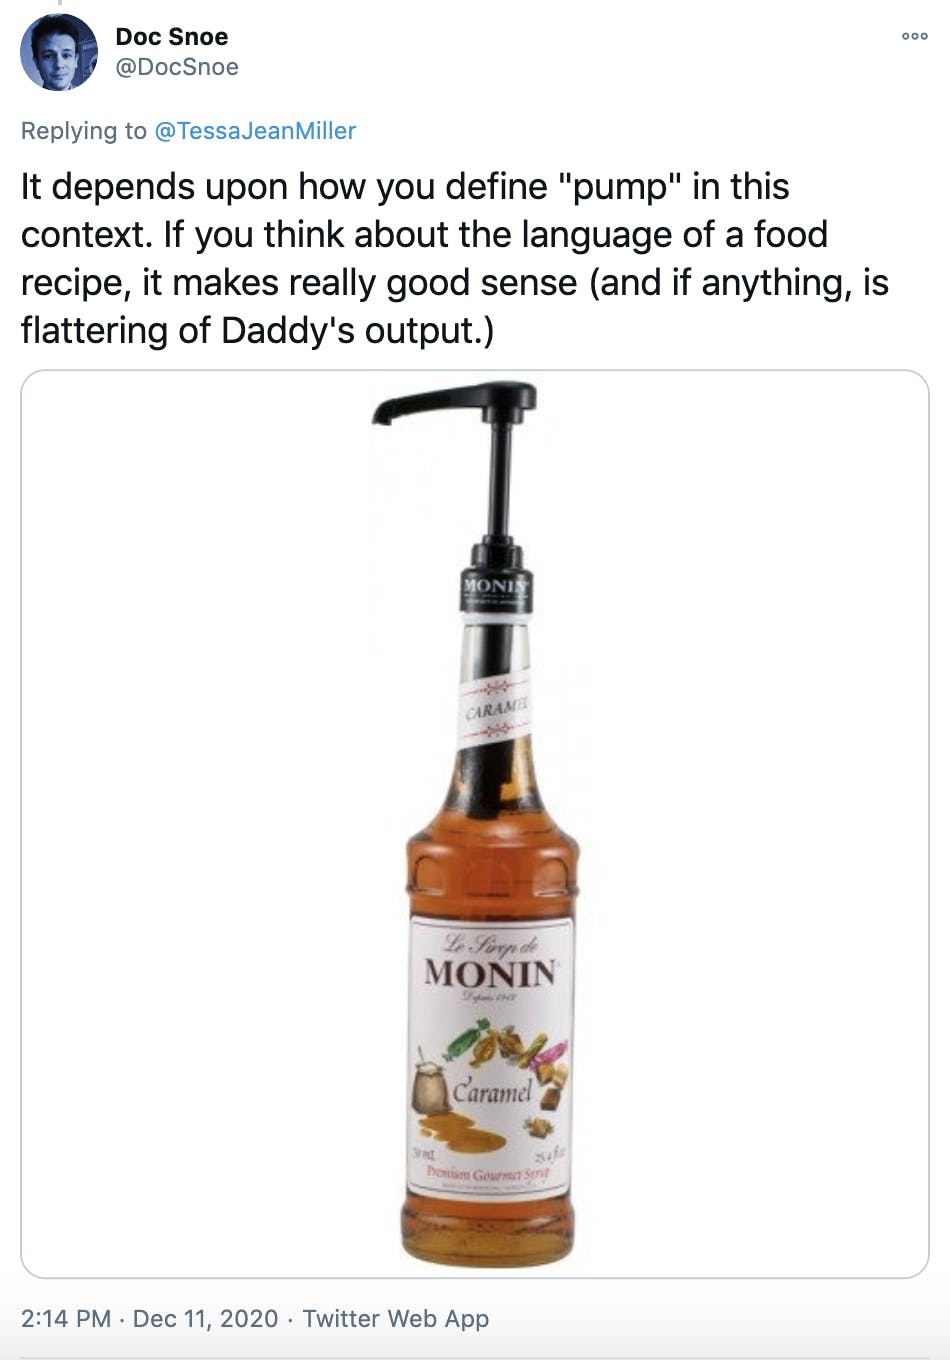 'It depends upon how you define 'pump' in this context. If you think about the language of a food recipe, it makes really good sense (and if anything, is flattering of Daddy's output.)' photograph of a Monin pump action caramel syrup bottle